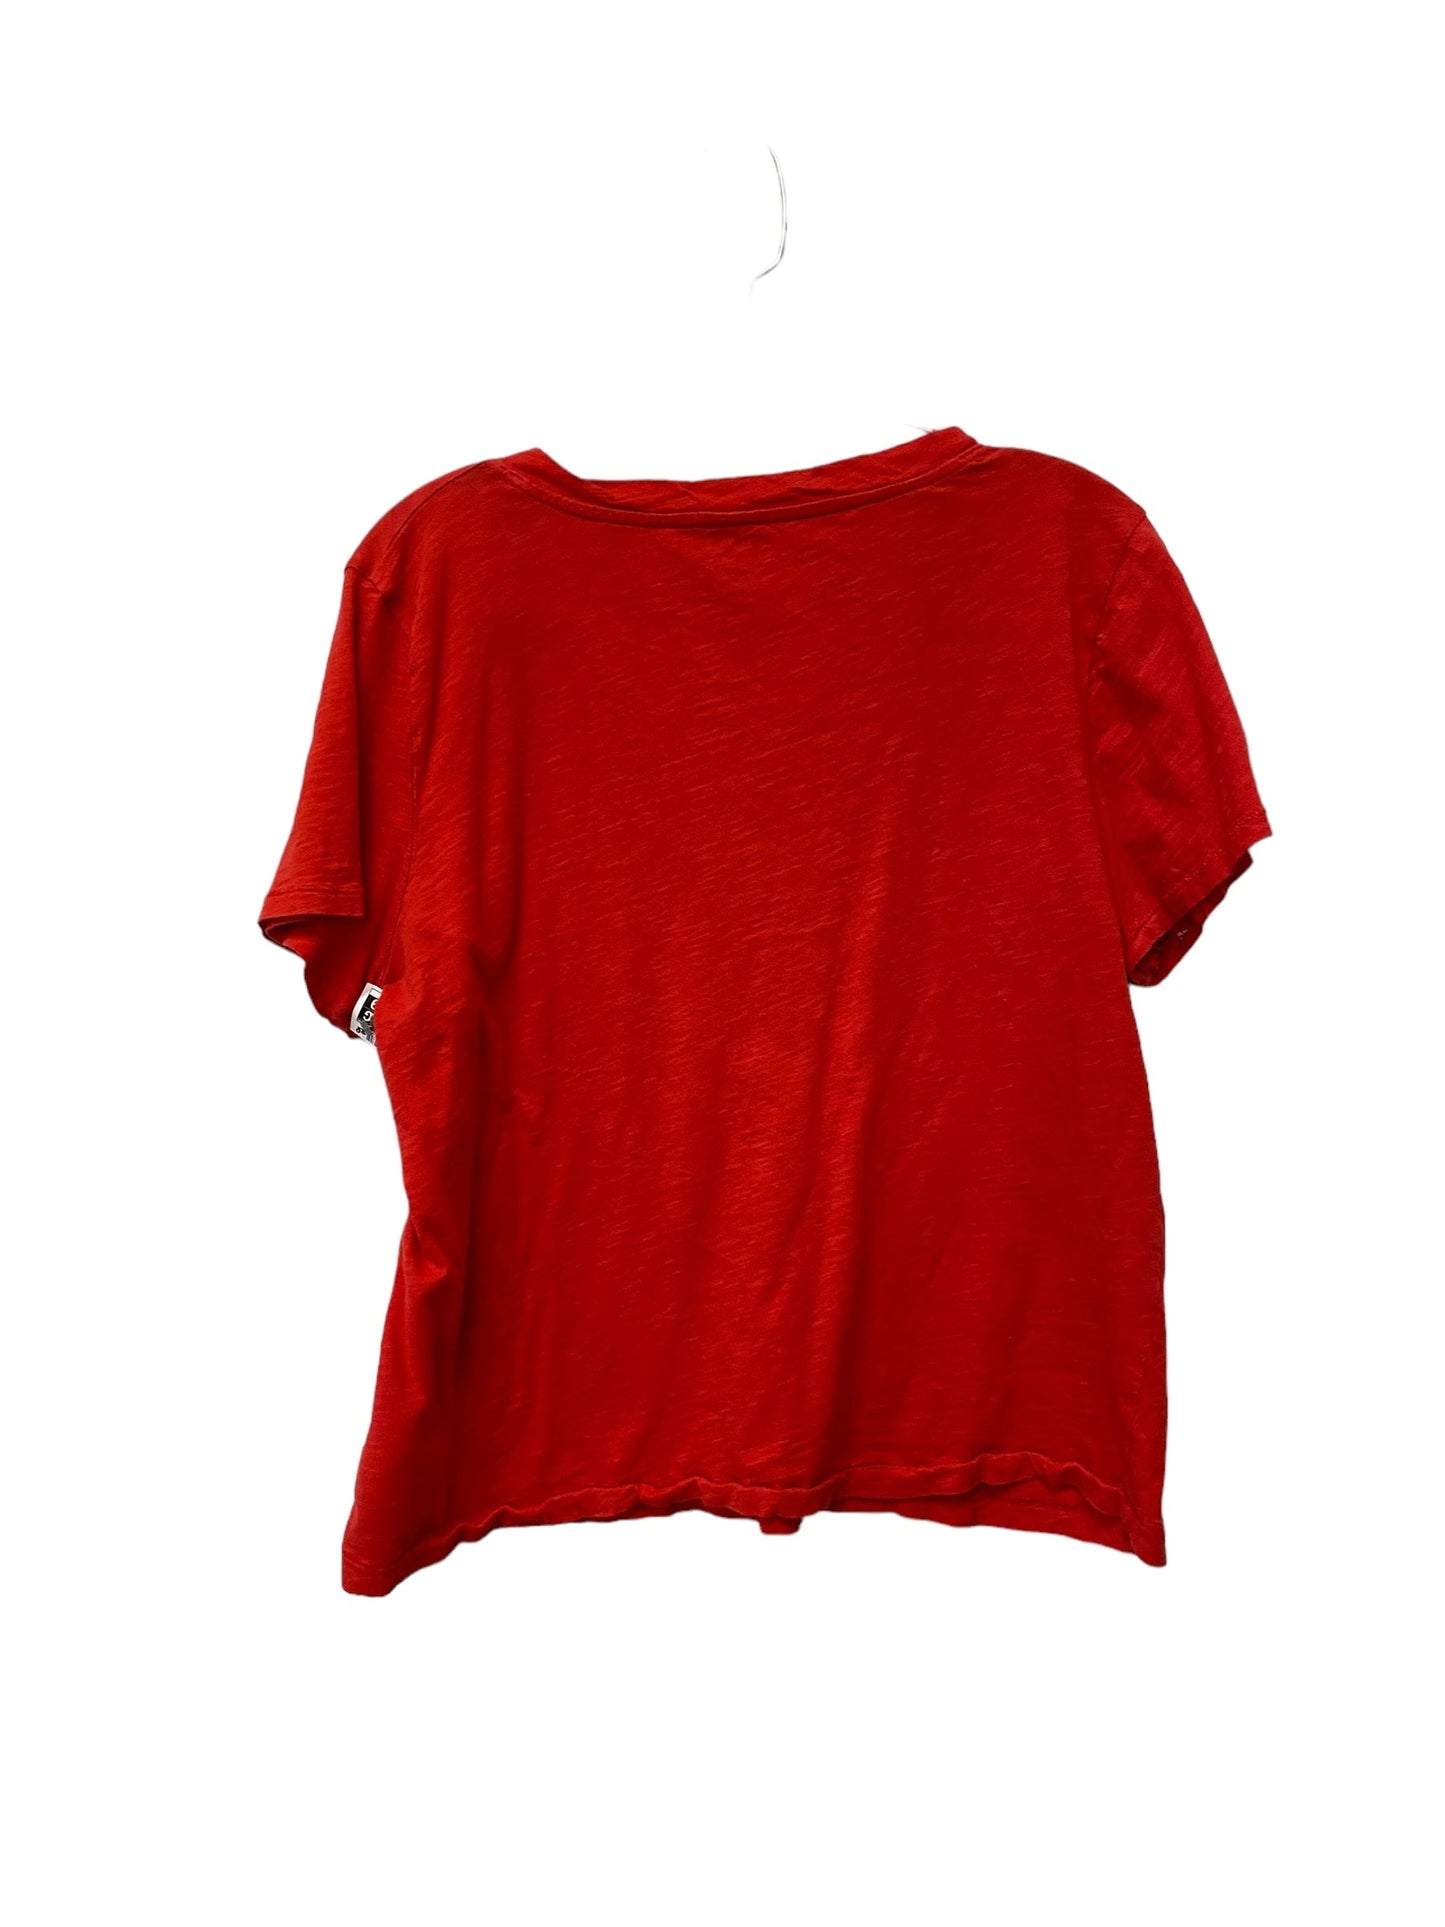 Red Top Short Sleeve Madewell, Size L